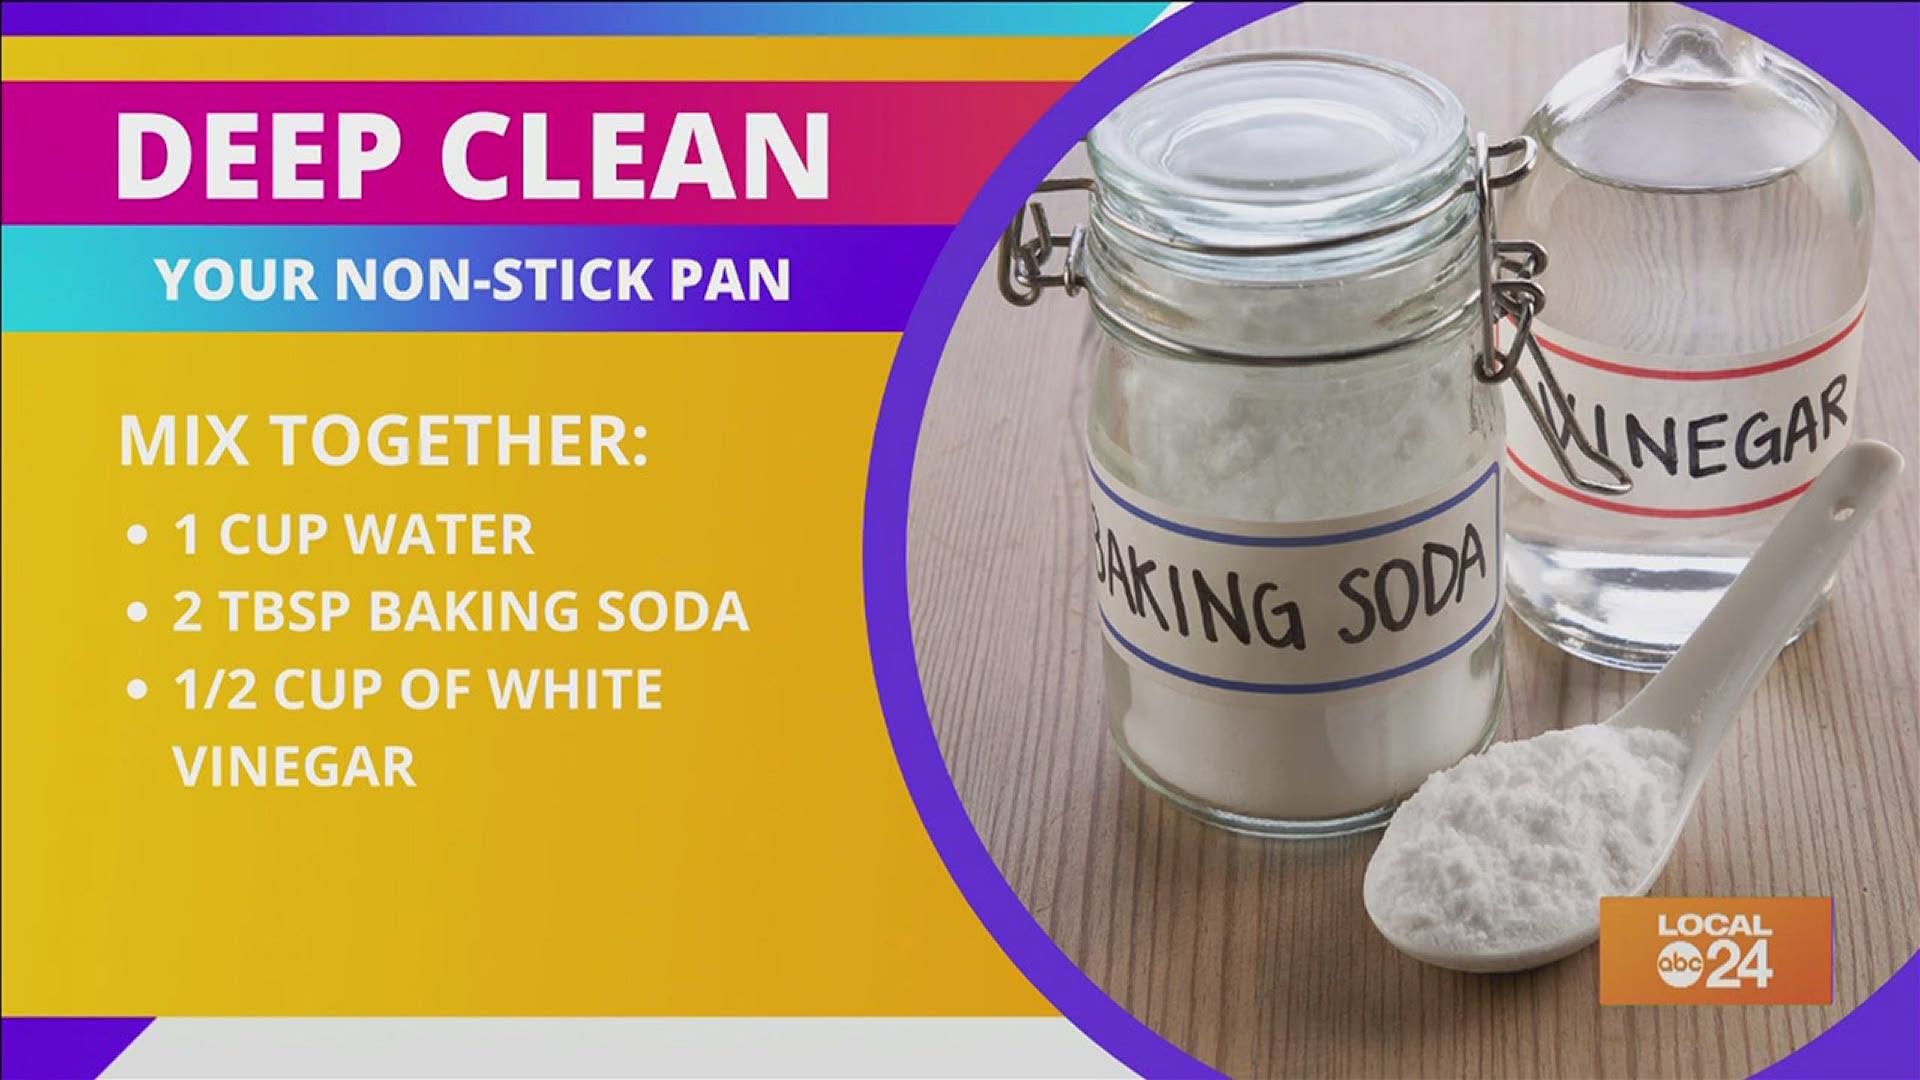 Don't let your precious non-stick pans go to waste! Check out this cleaning hack courtesy of Sydney Neely on "The Shortcut!"